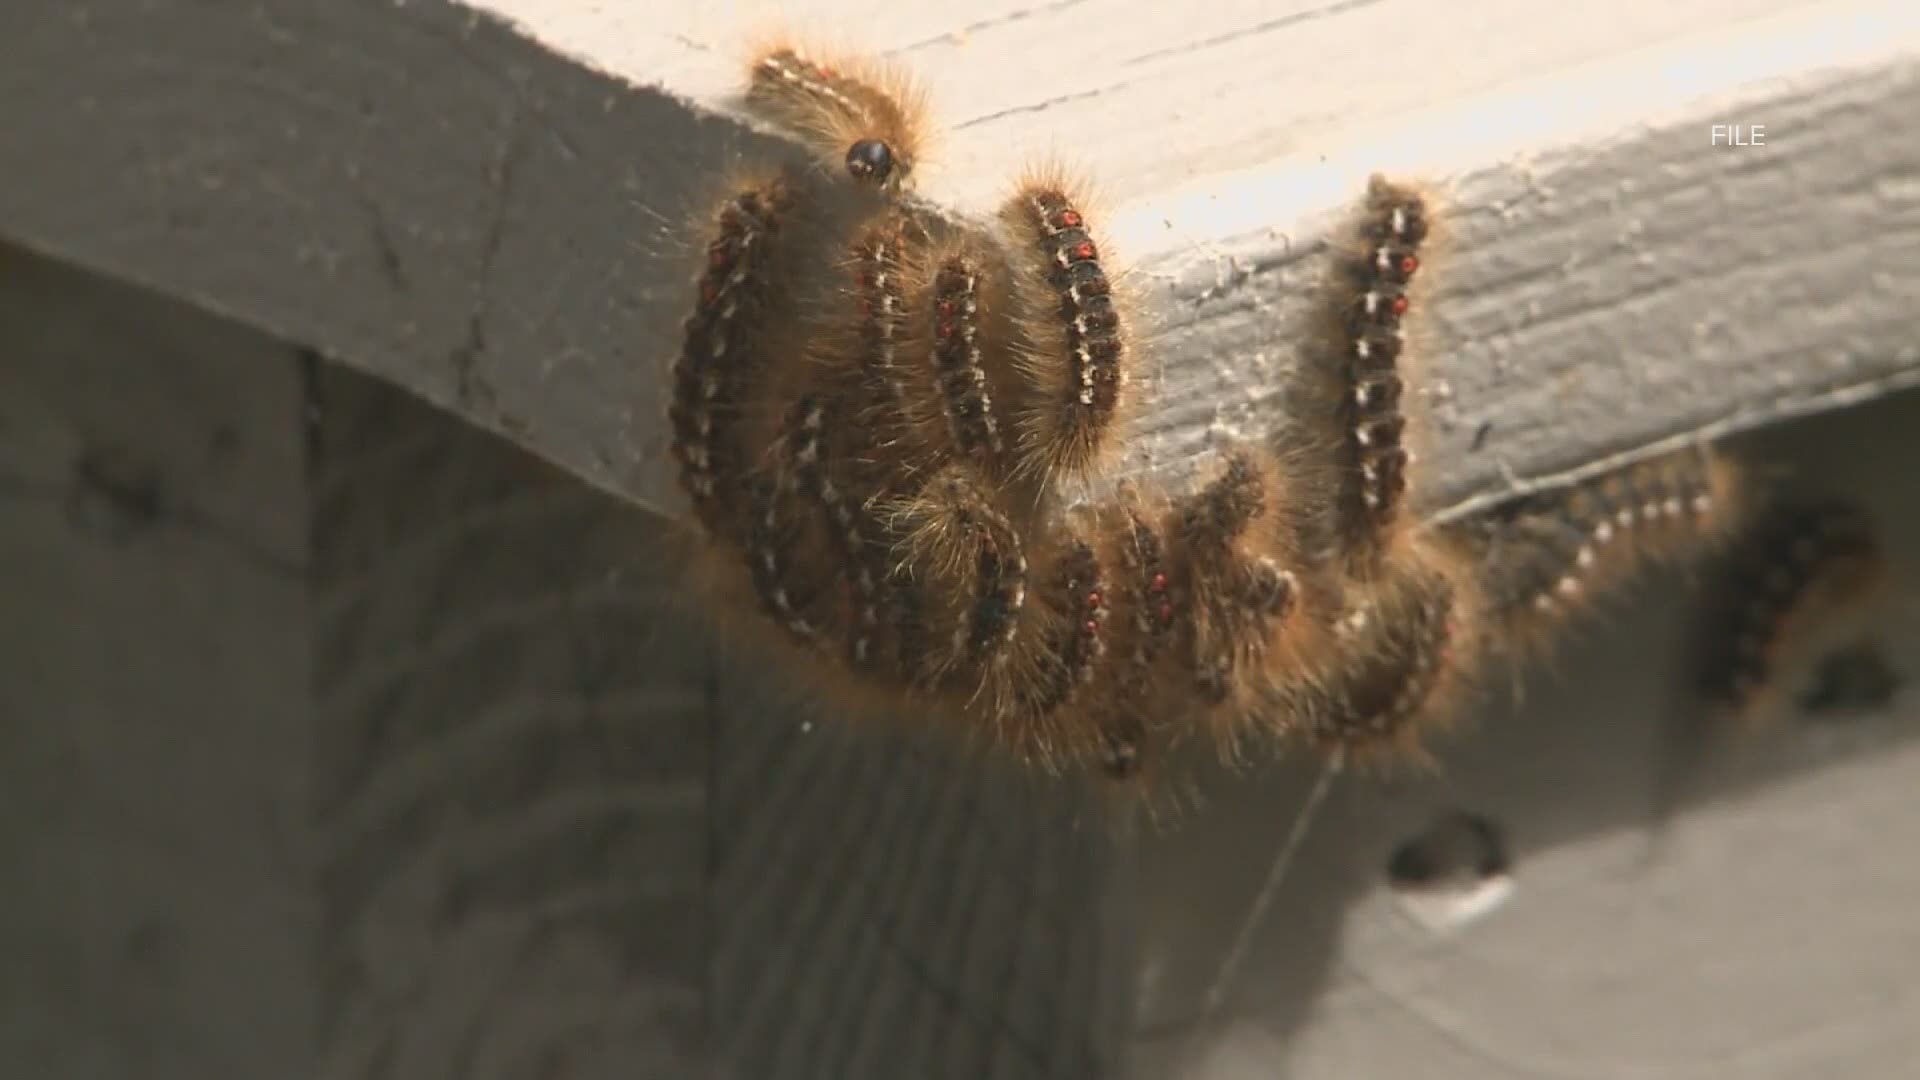 The city council held an emergency meeting Friday night in an effort to find ways of managing the high numbers of the brown tail moths in the area.